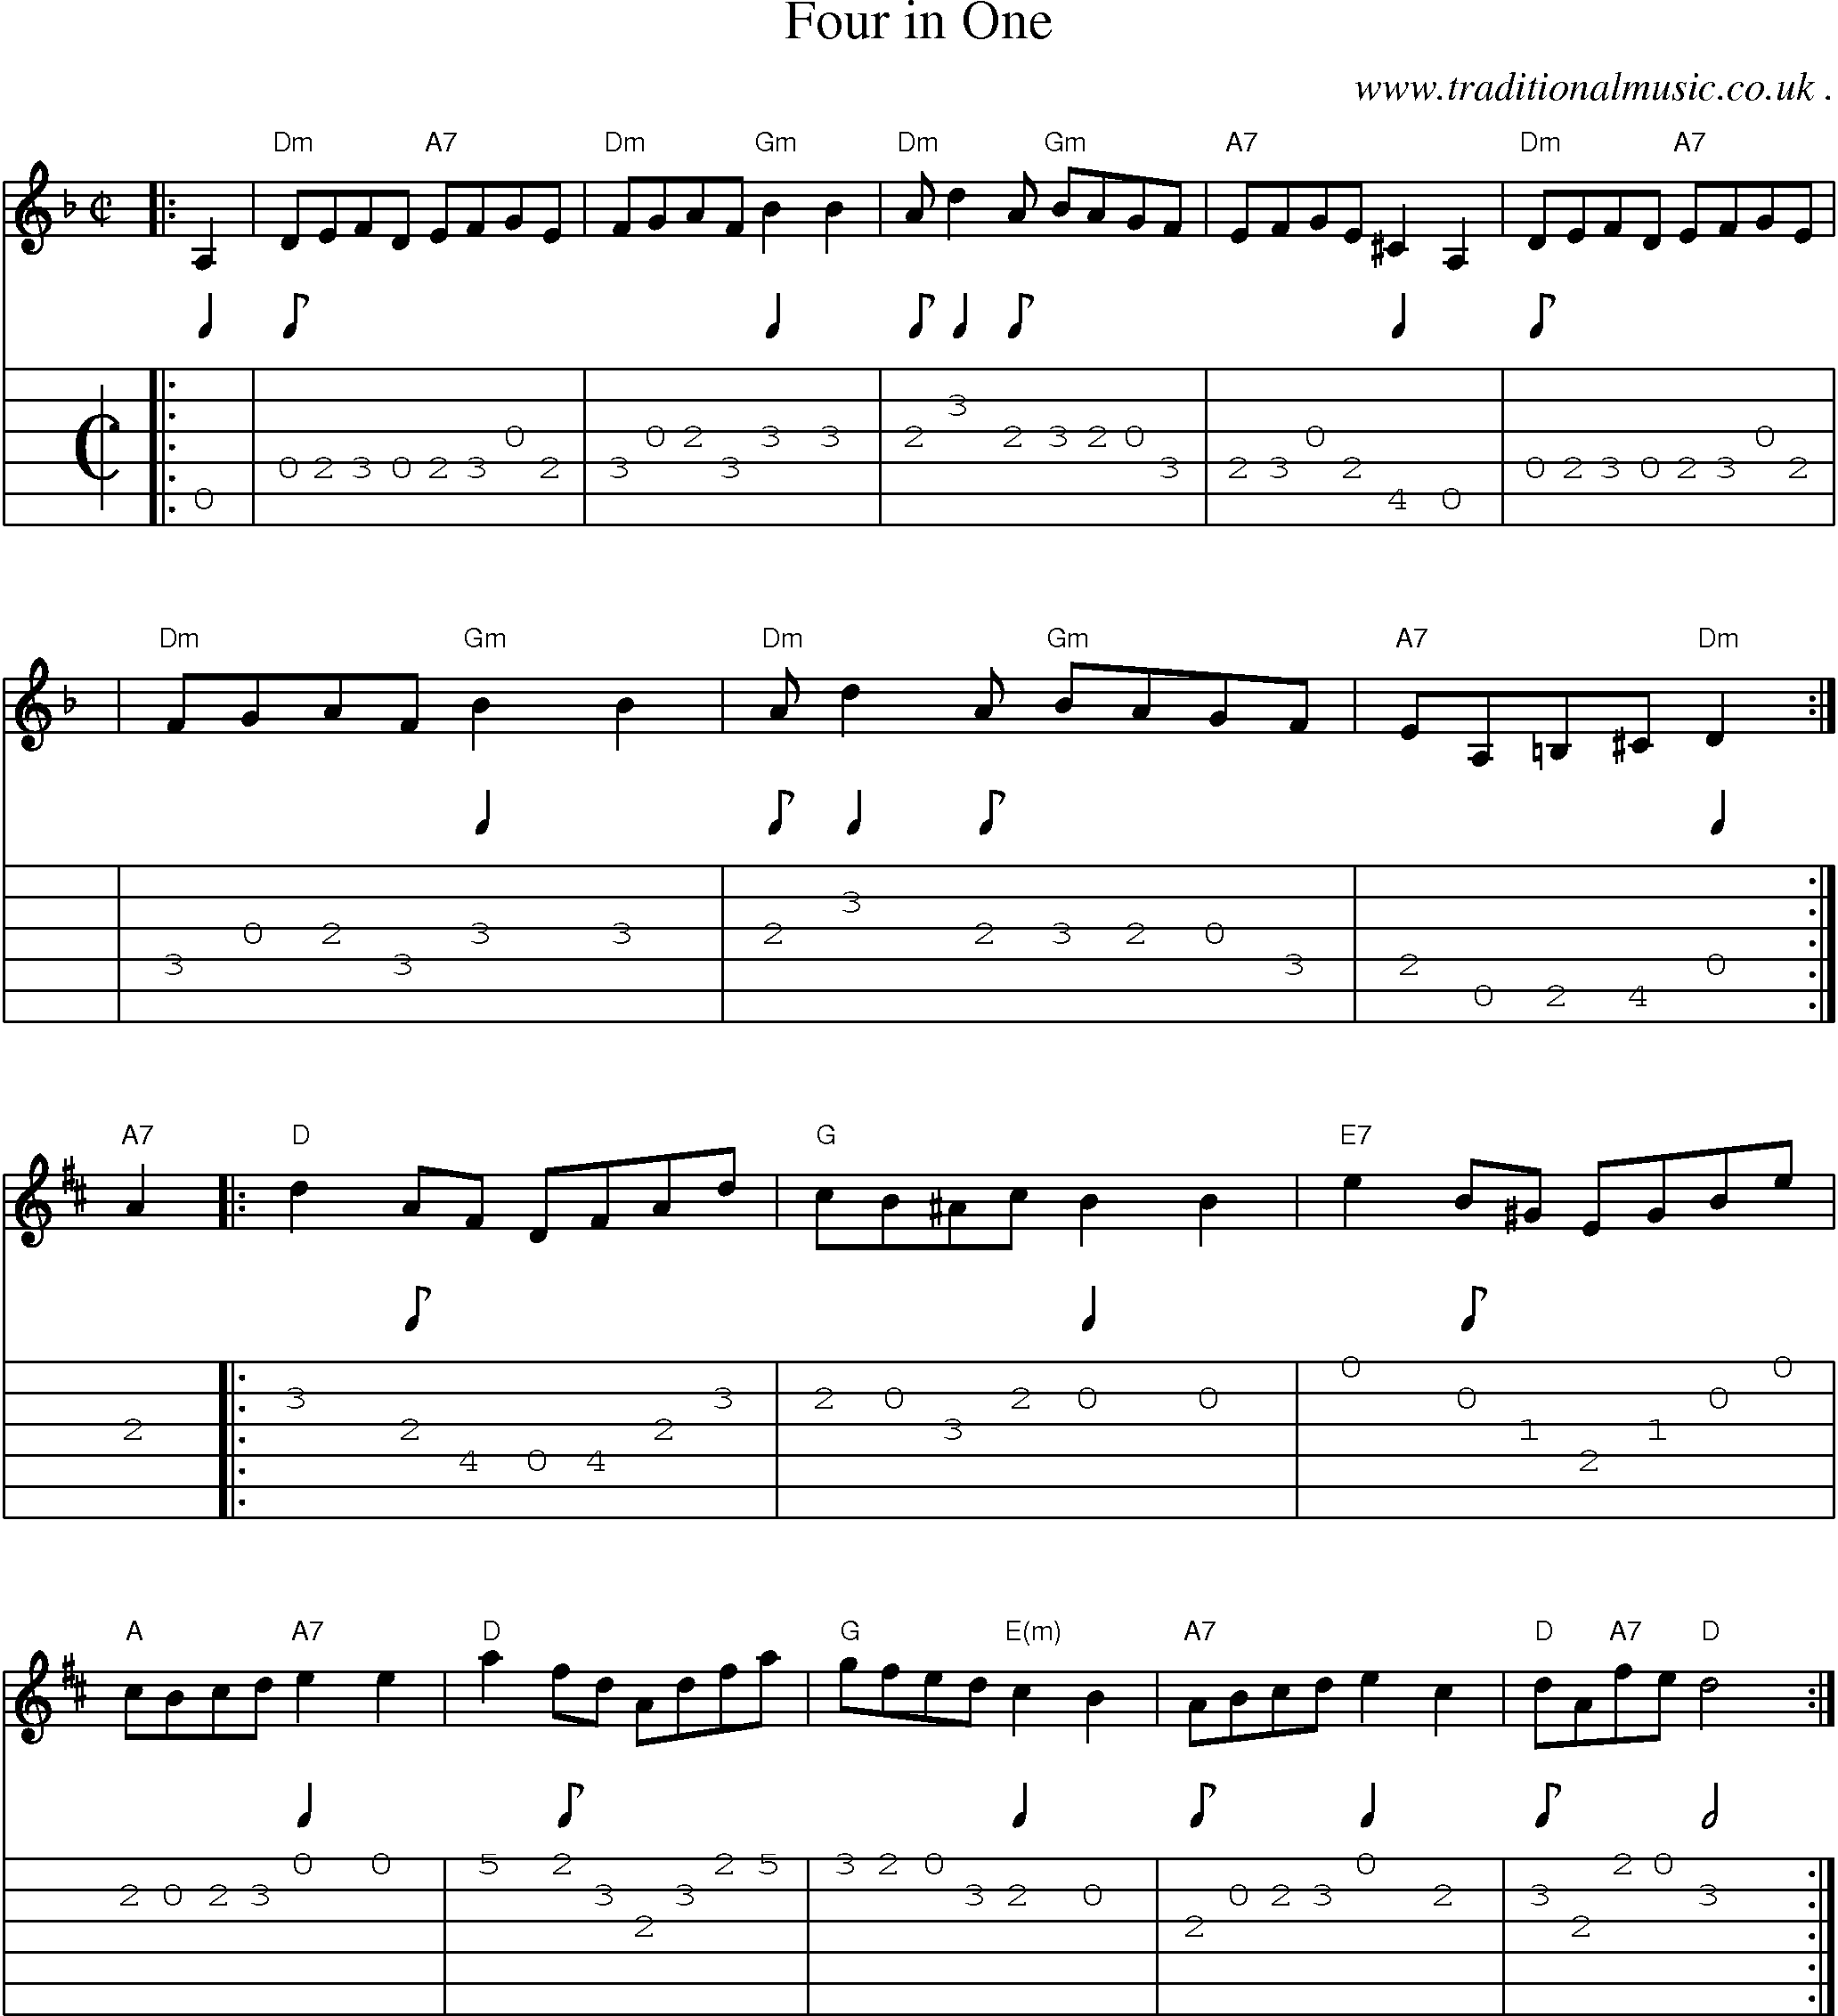 Sheet-music  score, Chords and Guitar Tabs for Four In One